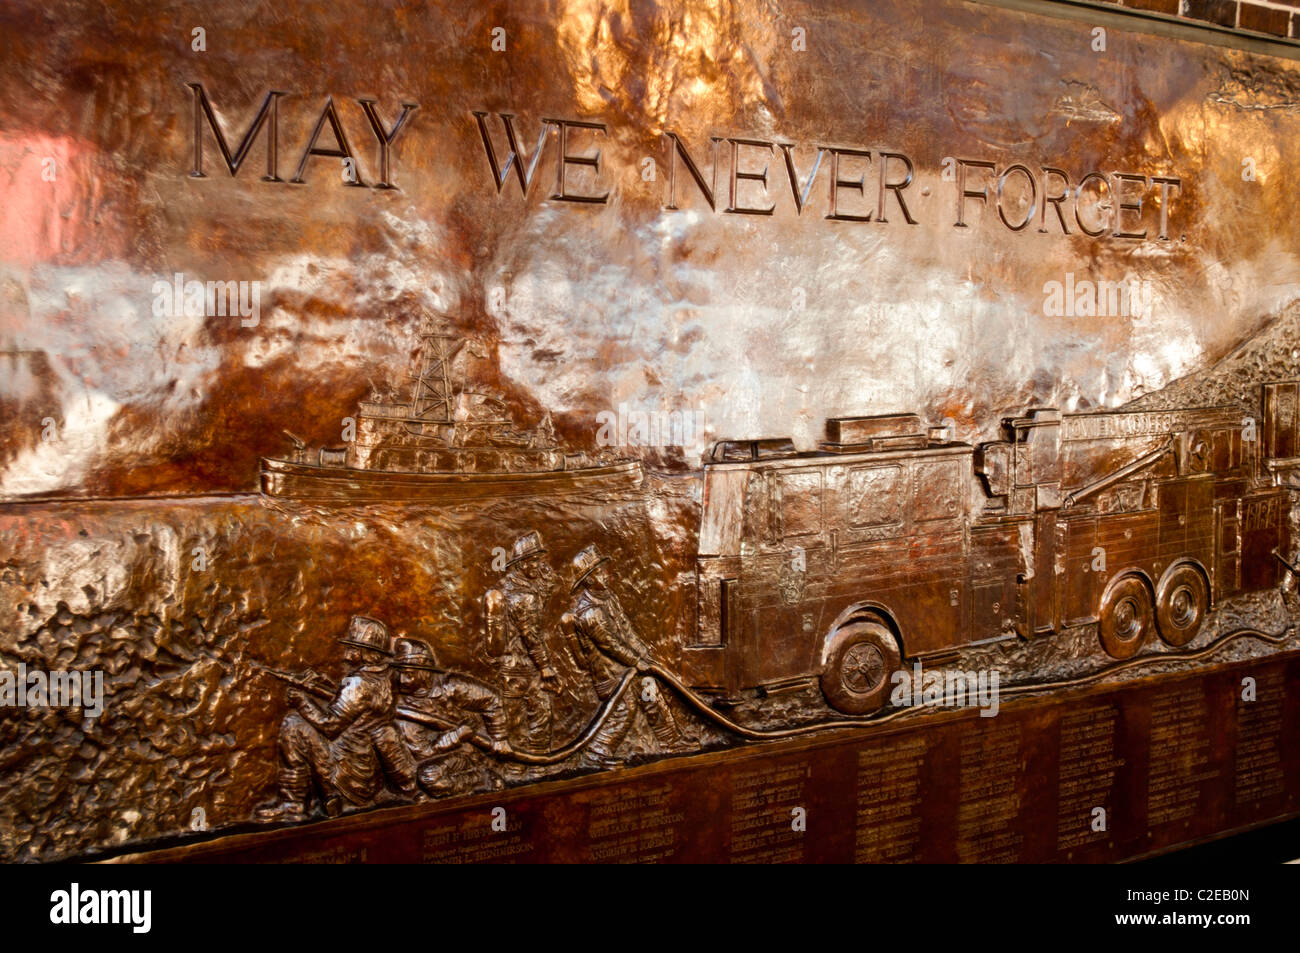 Ground Zero, May we never forget sign of New York Fire Department NYFD Memorial Wall bronze bass-relief, Manhattan, New York Stock Photo